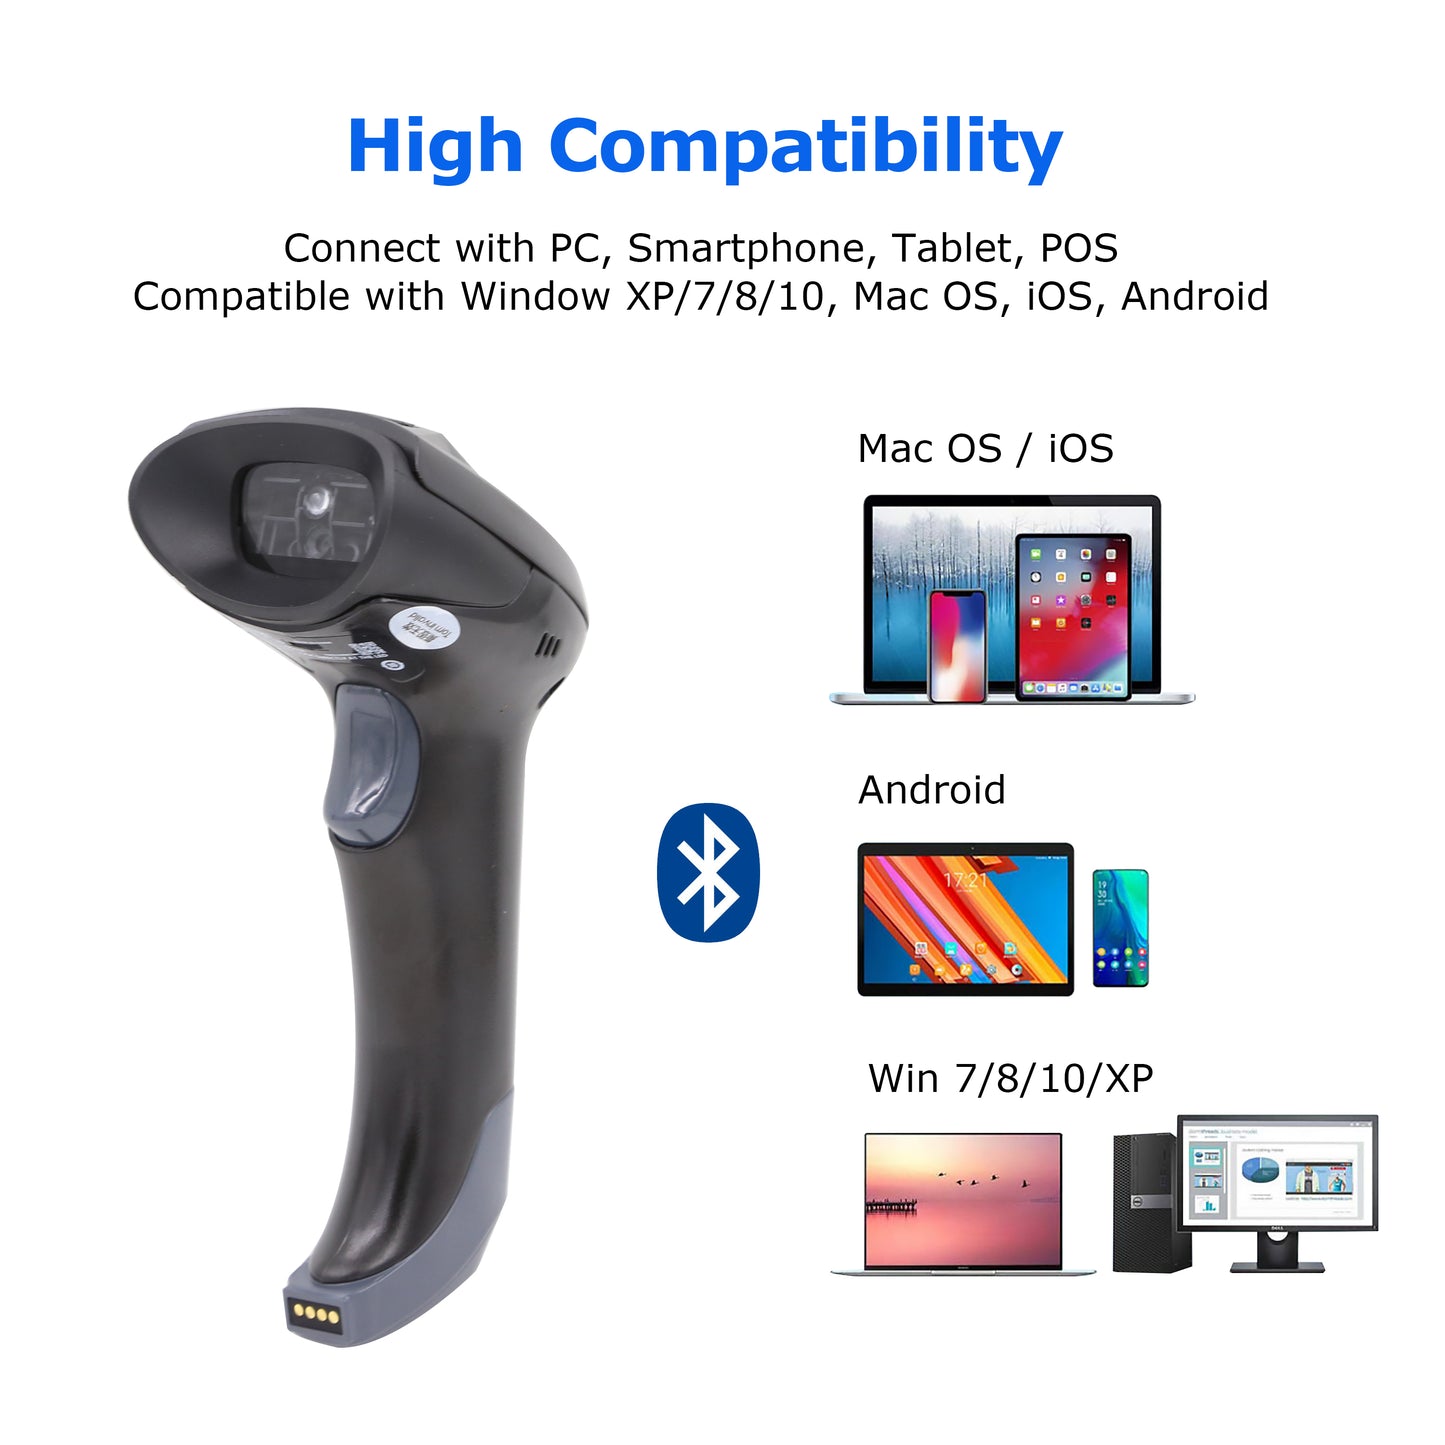 TEEMI TMSL-56 QR Bluetooth Barcode Scanner, 1D 2D Wireless USB Imager for iPhone ipad Andriod Smartphone Tablet Mac Windows PC, Support PDF417 Driver License, Stable Bluetooth 5.0 Technology, with USB Dongle, NO USB CRADLE